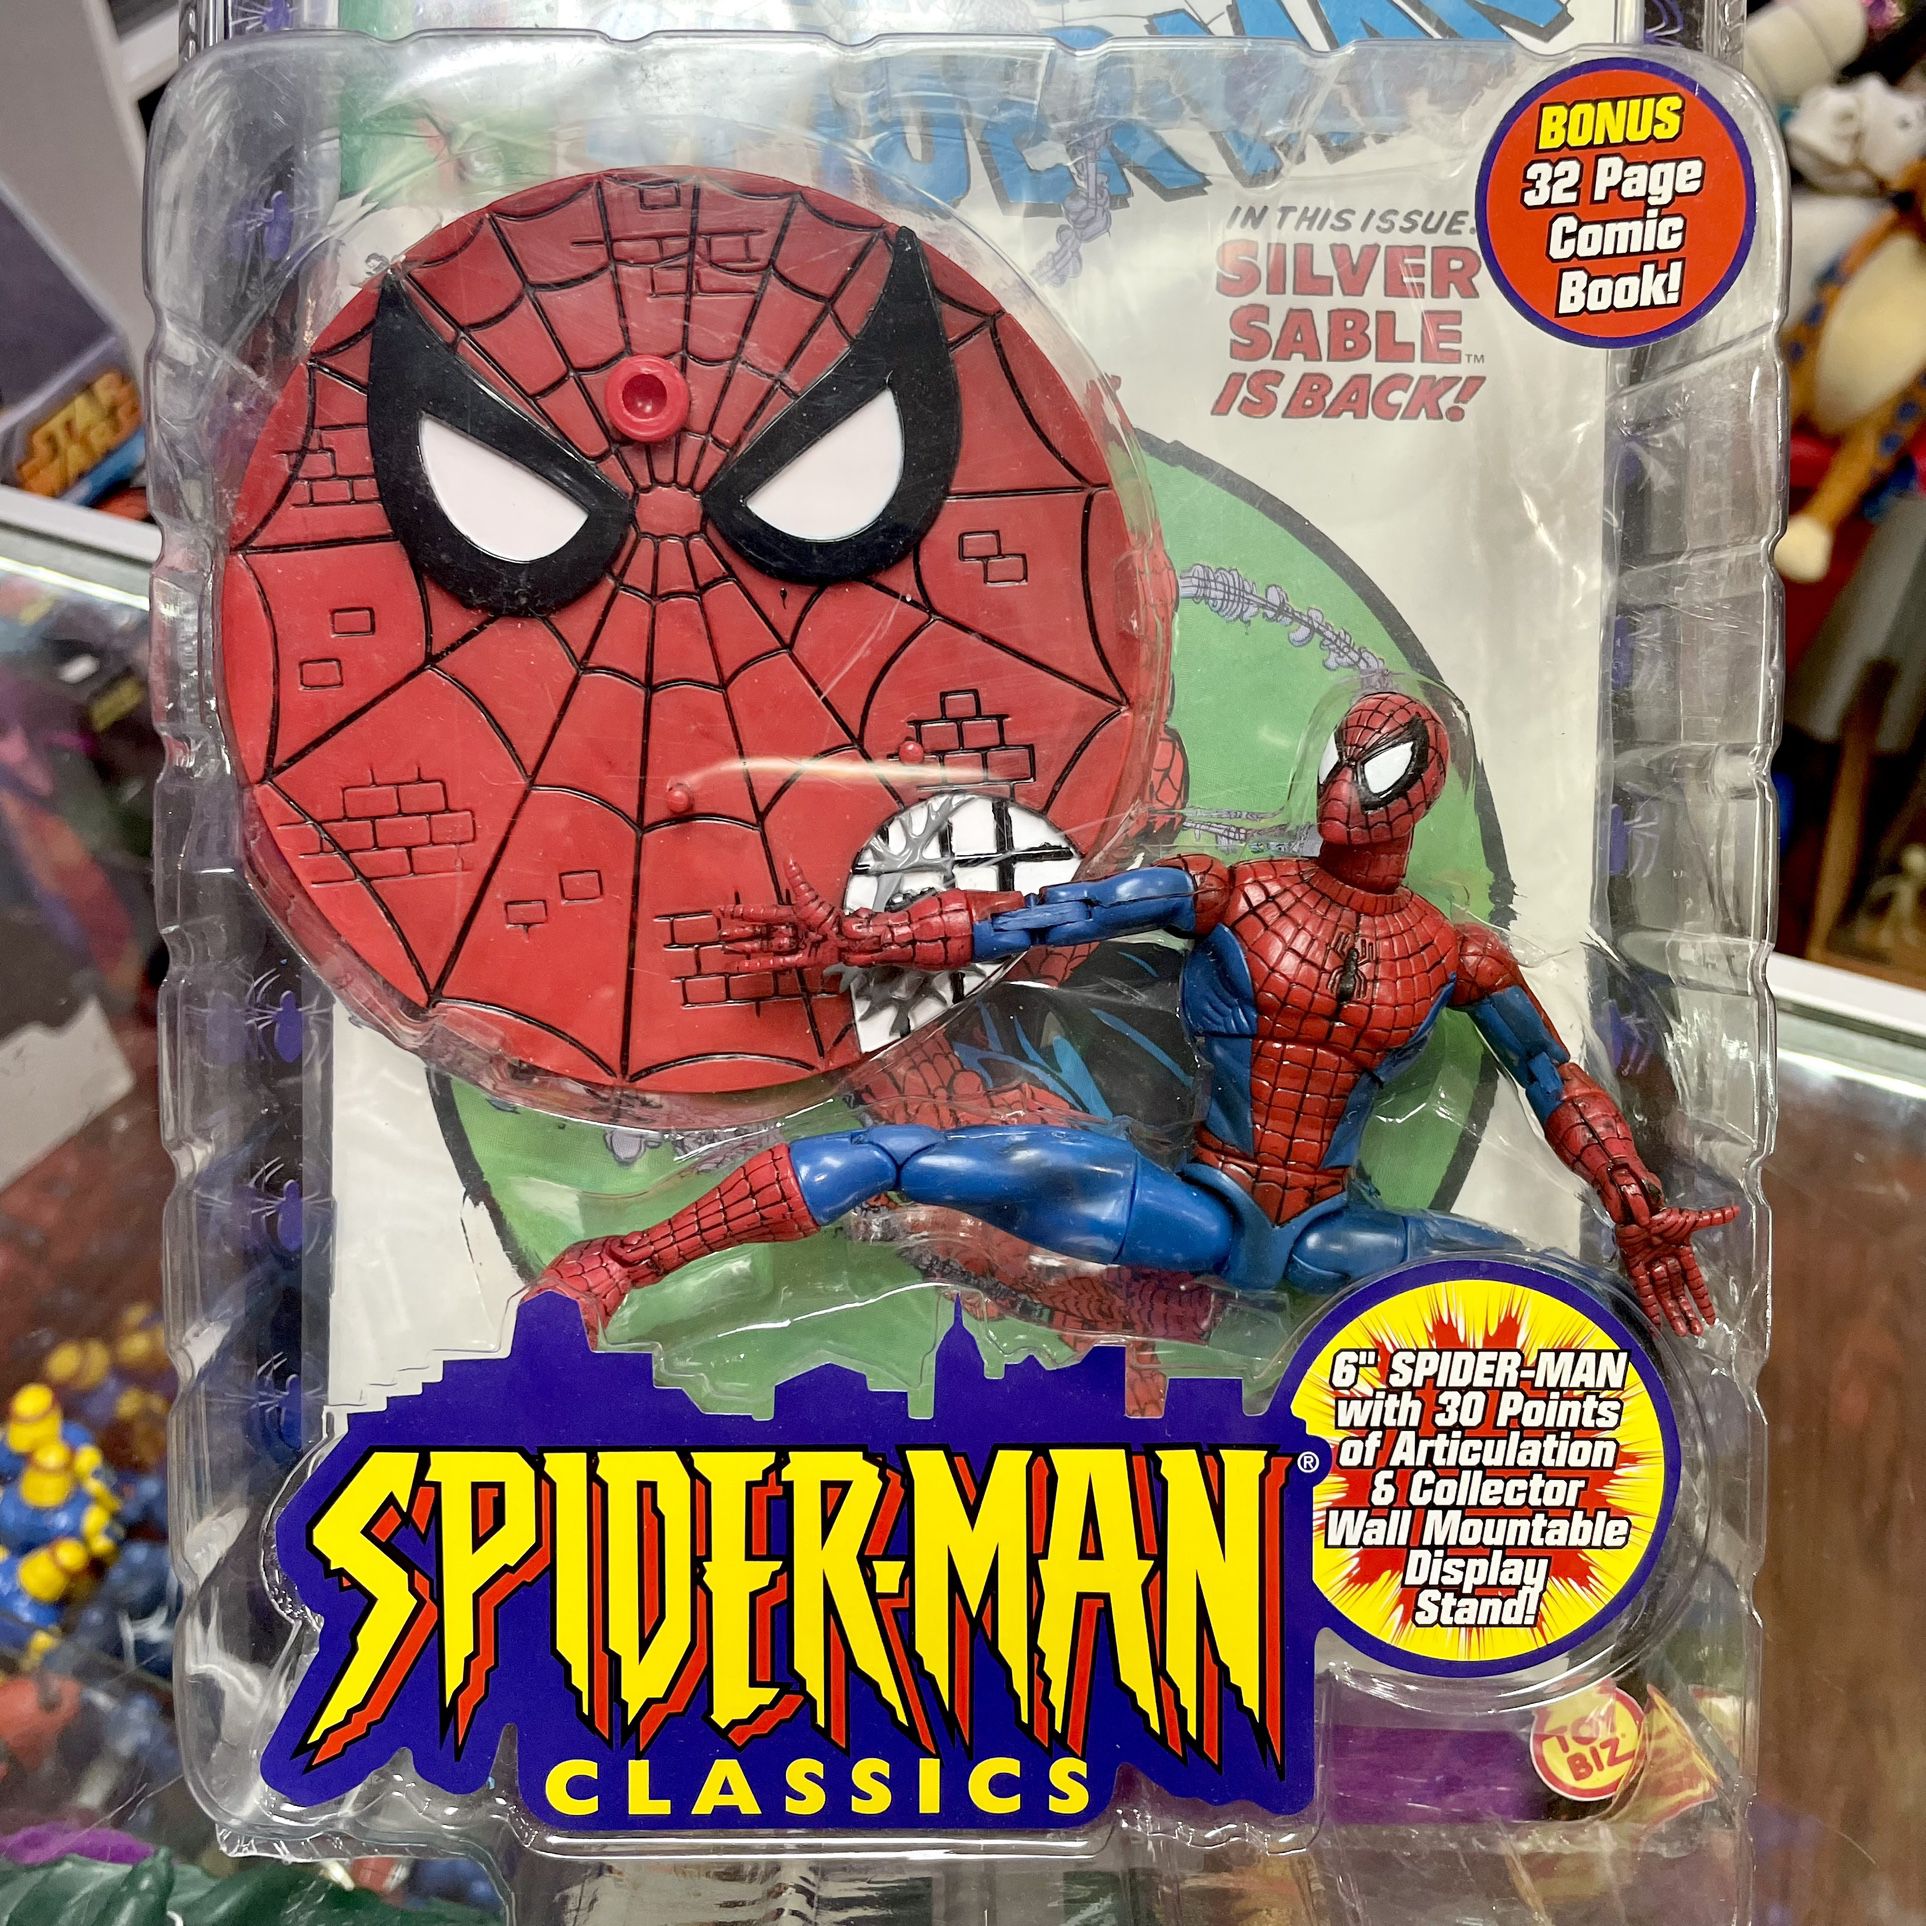 Vintage 2000 Toy Biz Spider-Man Classics 6” Action Figure Toy NIB - 30 Points Of Articulation, Wall Mountable Display Stand & 30 Page Comic Book